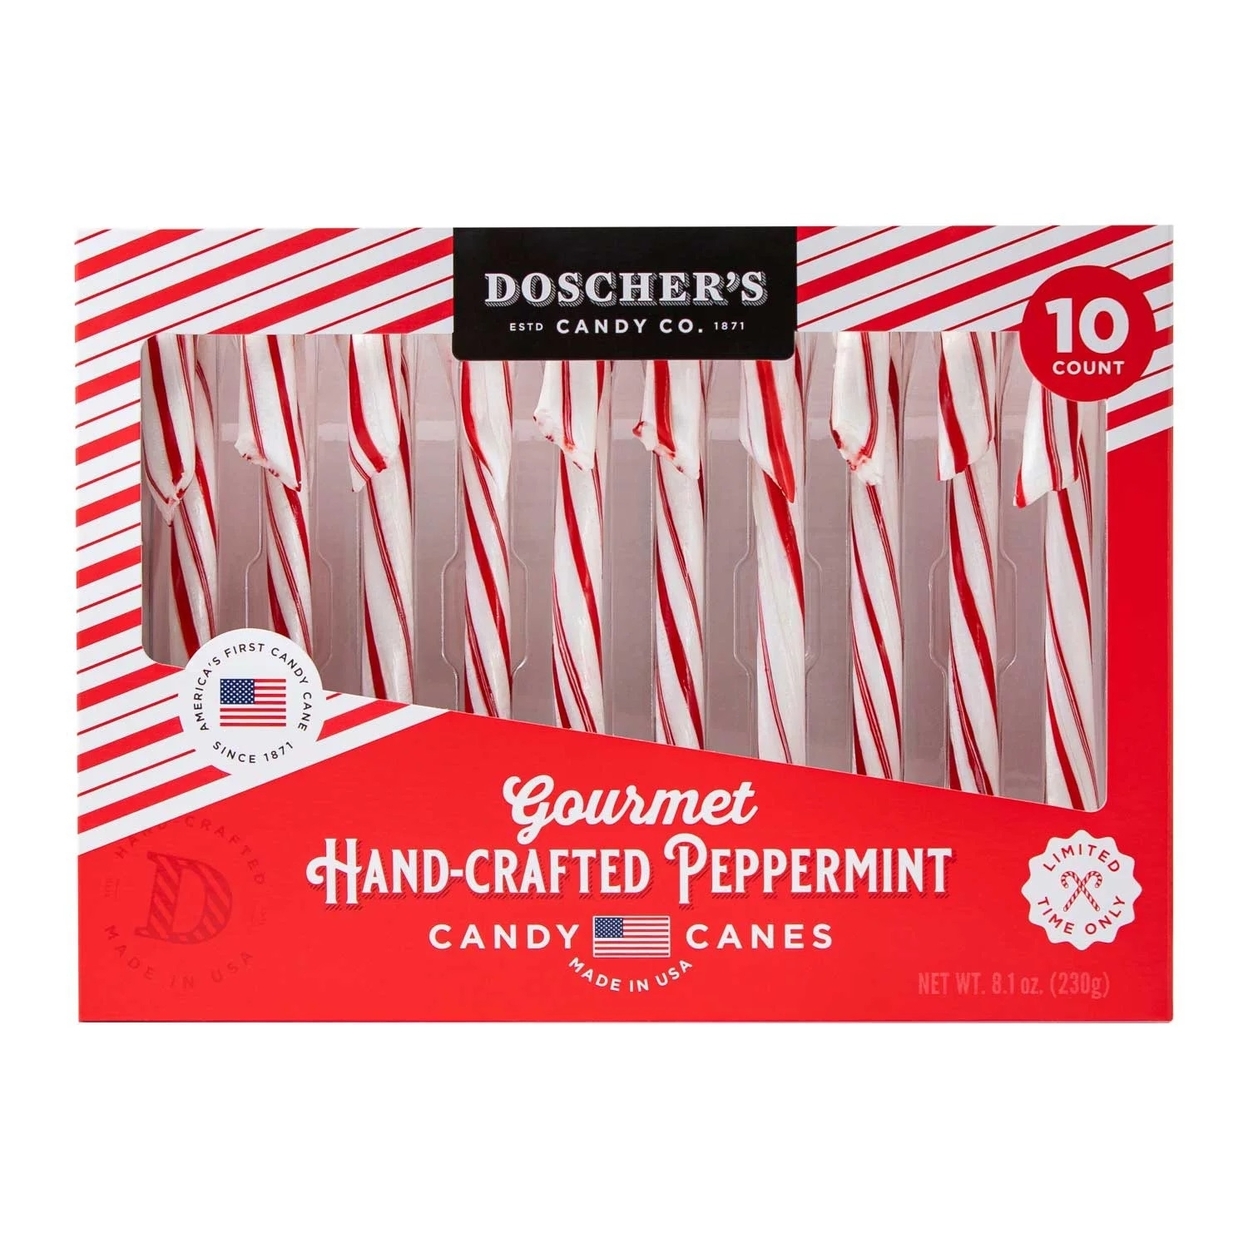 Doscher's Gourmet Hand-Crafted Peppermint Candy Canes (10 Count)